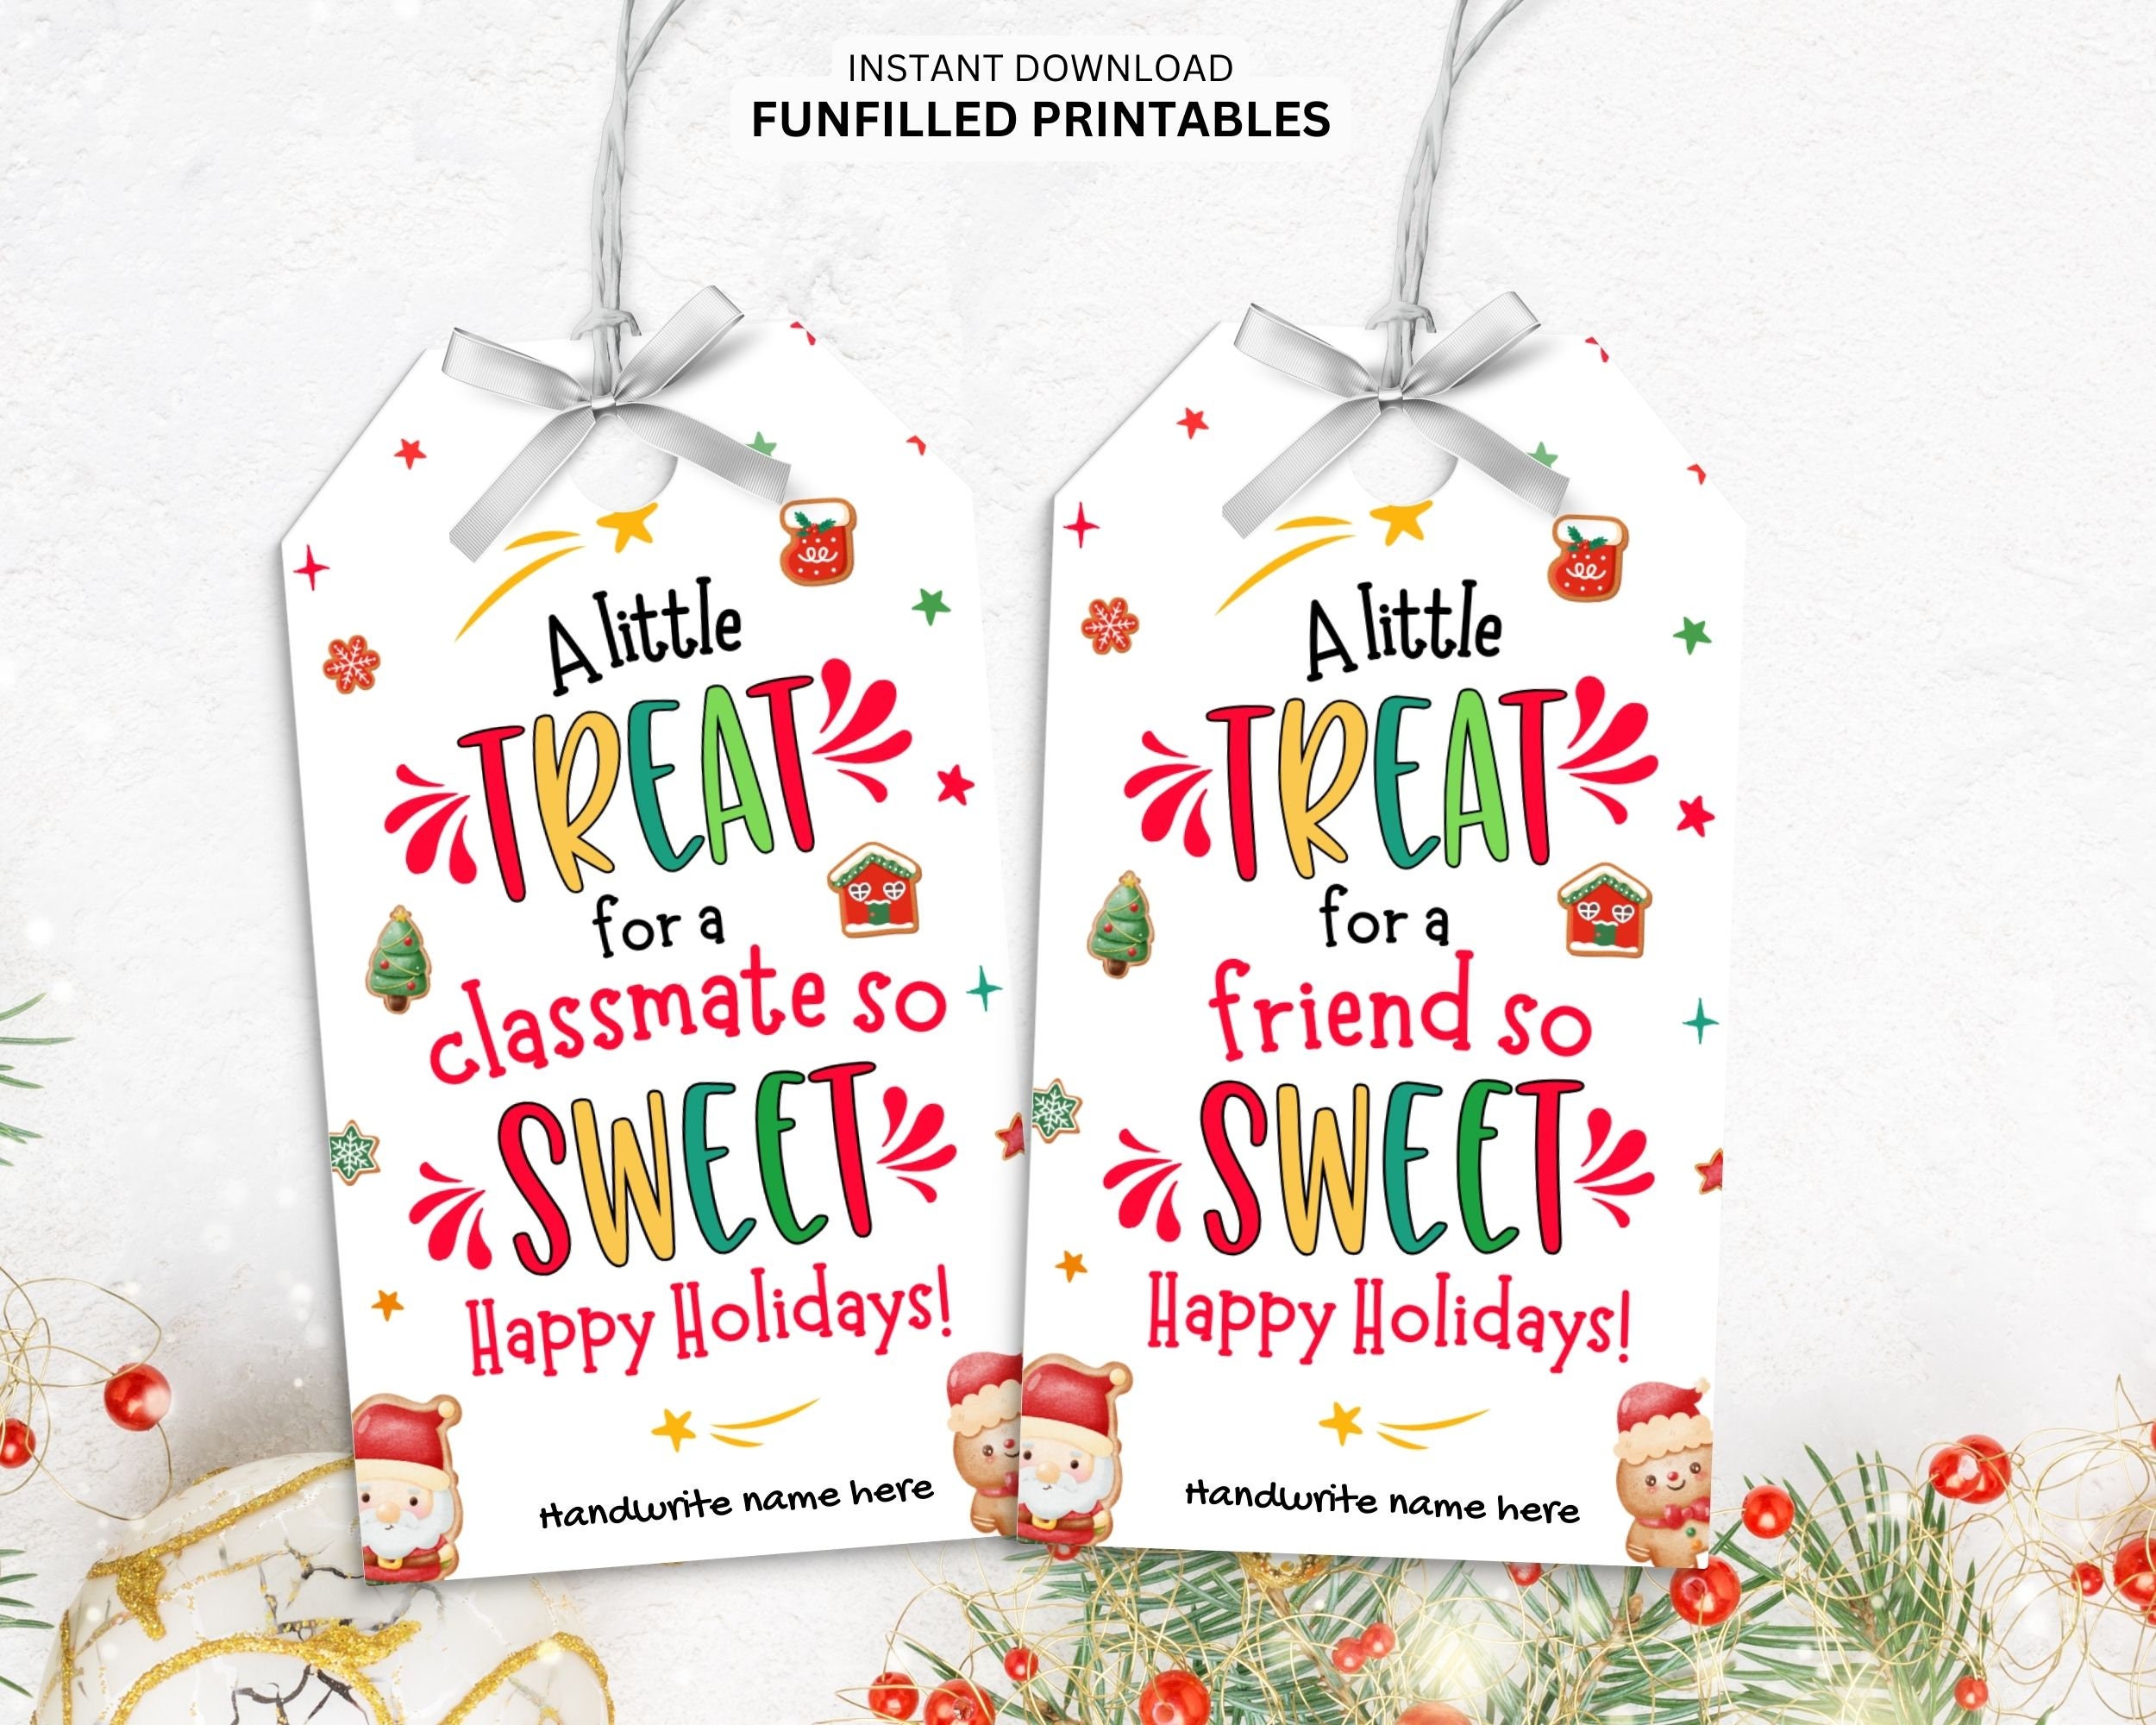 DIY Wikki Stix 'stuck on You' Personalized Printable Party Favor Bag Tag  sugar-free Fun Treat Bag Topper 'pretty Personal by Jenna' 